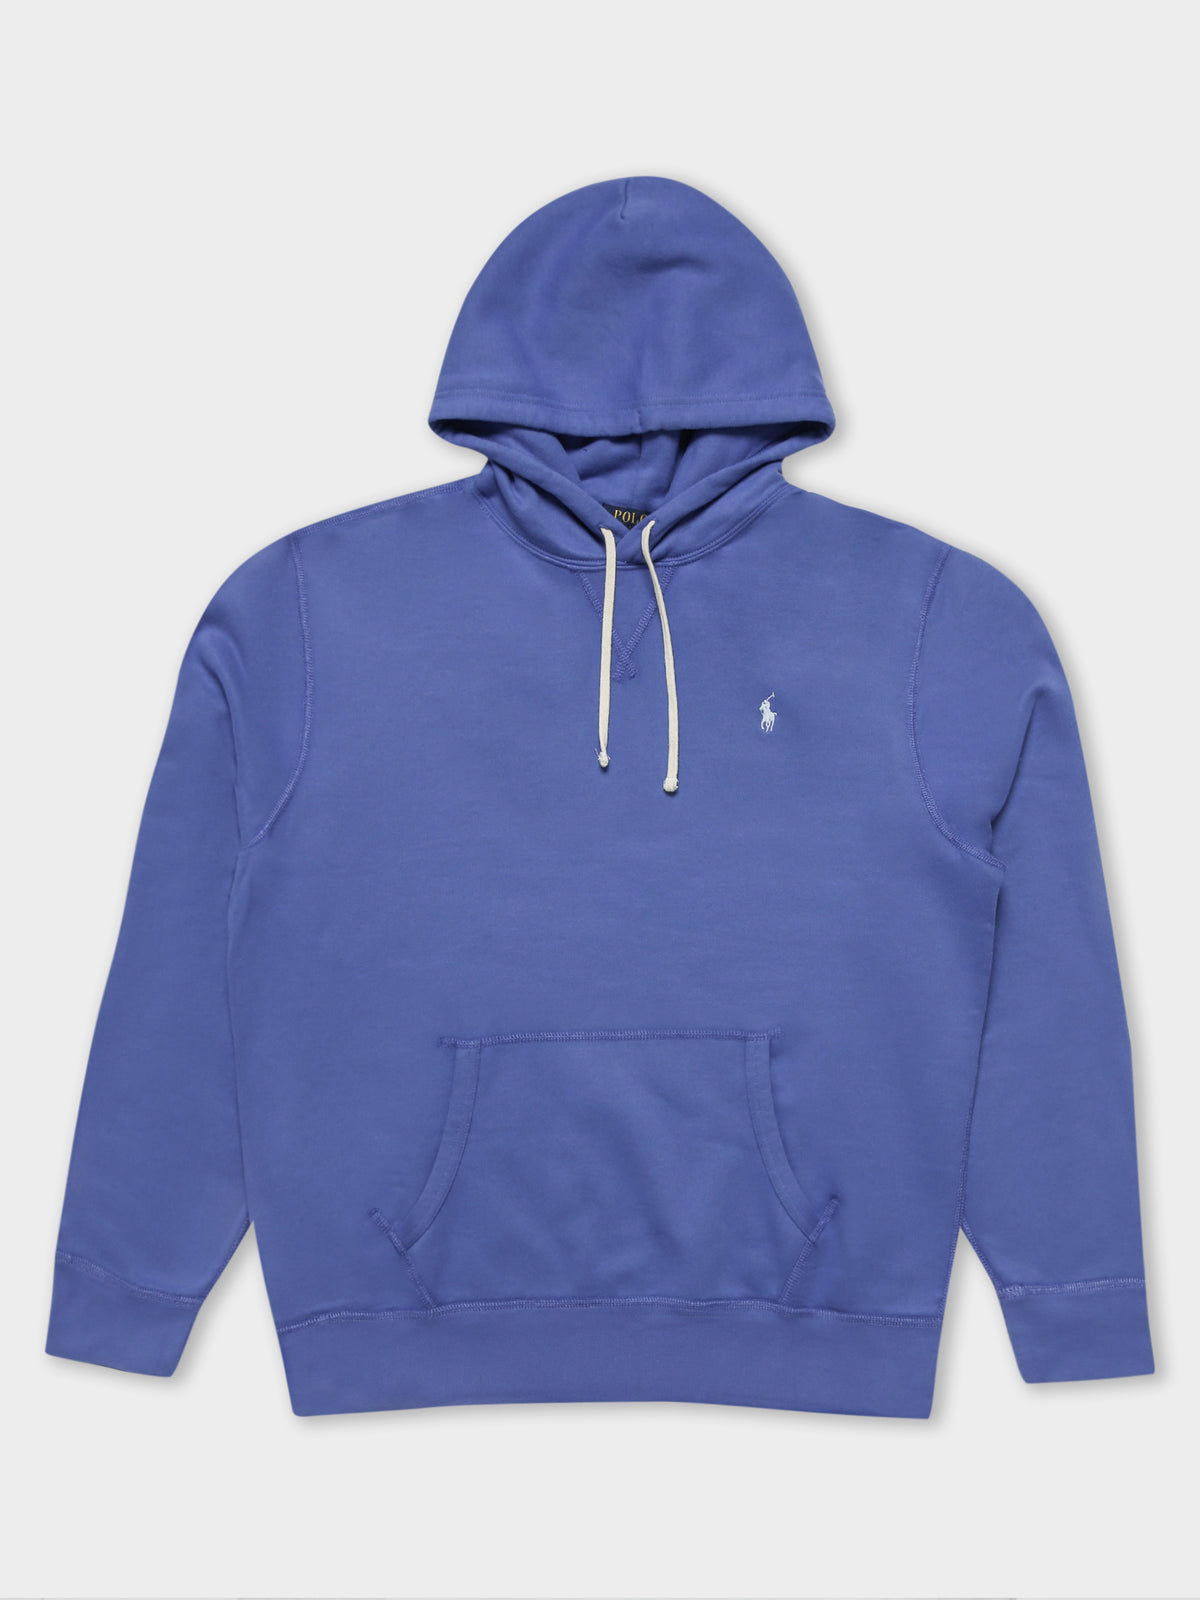 Classic Popover Hoodie in Liberty Blue